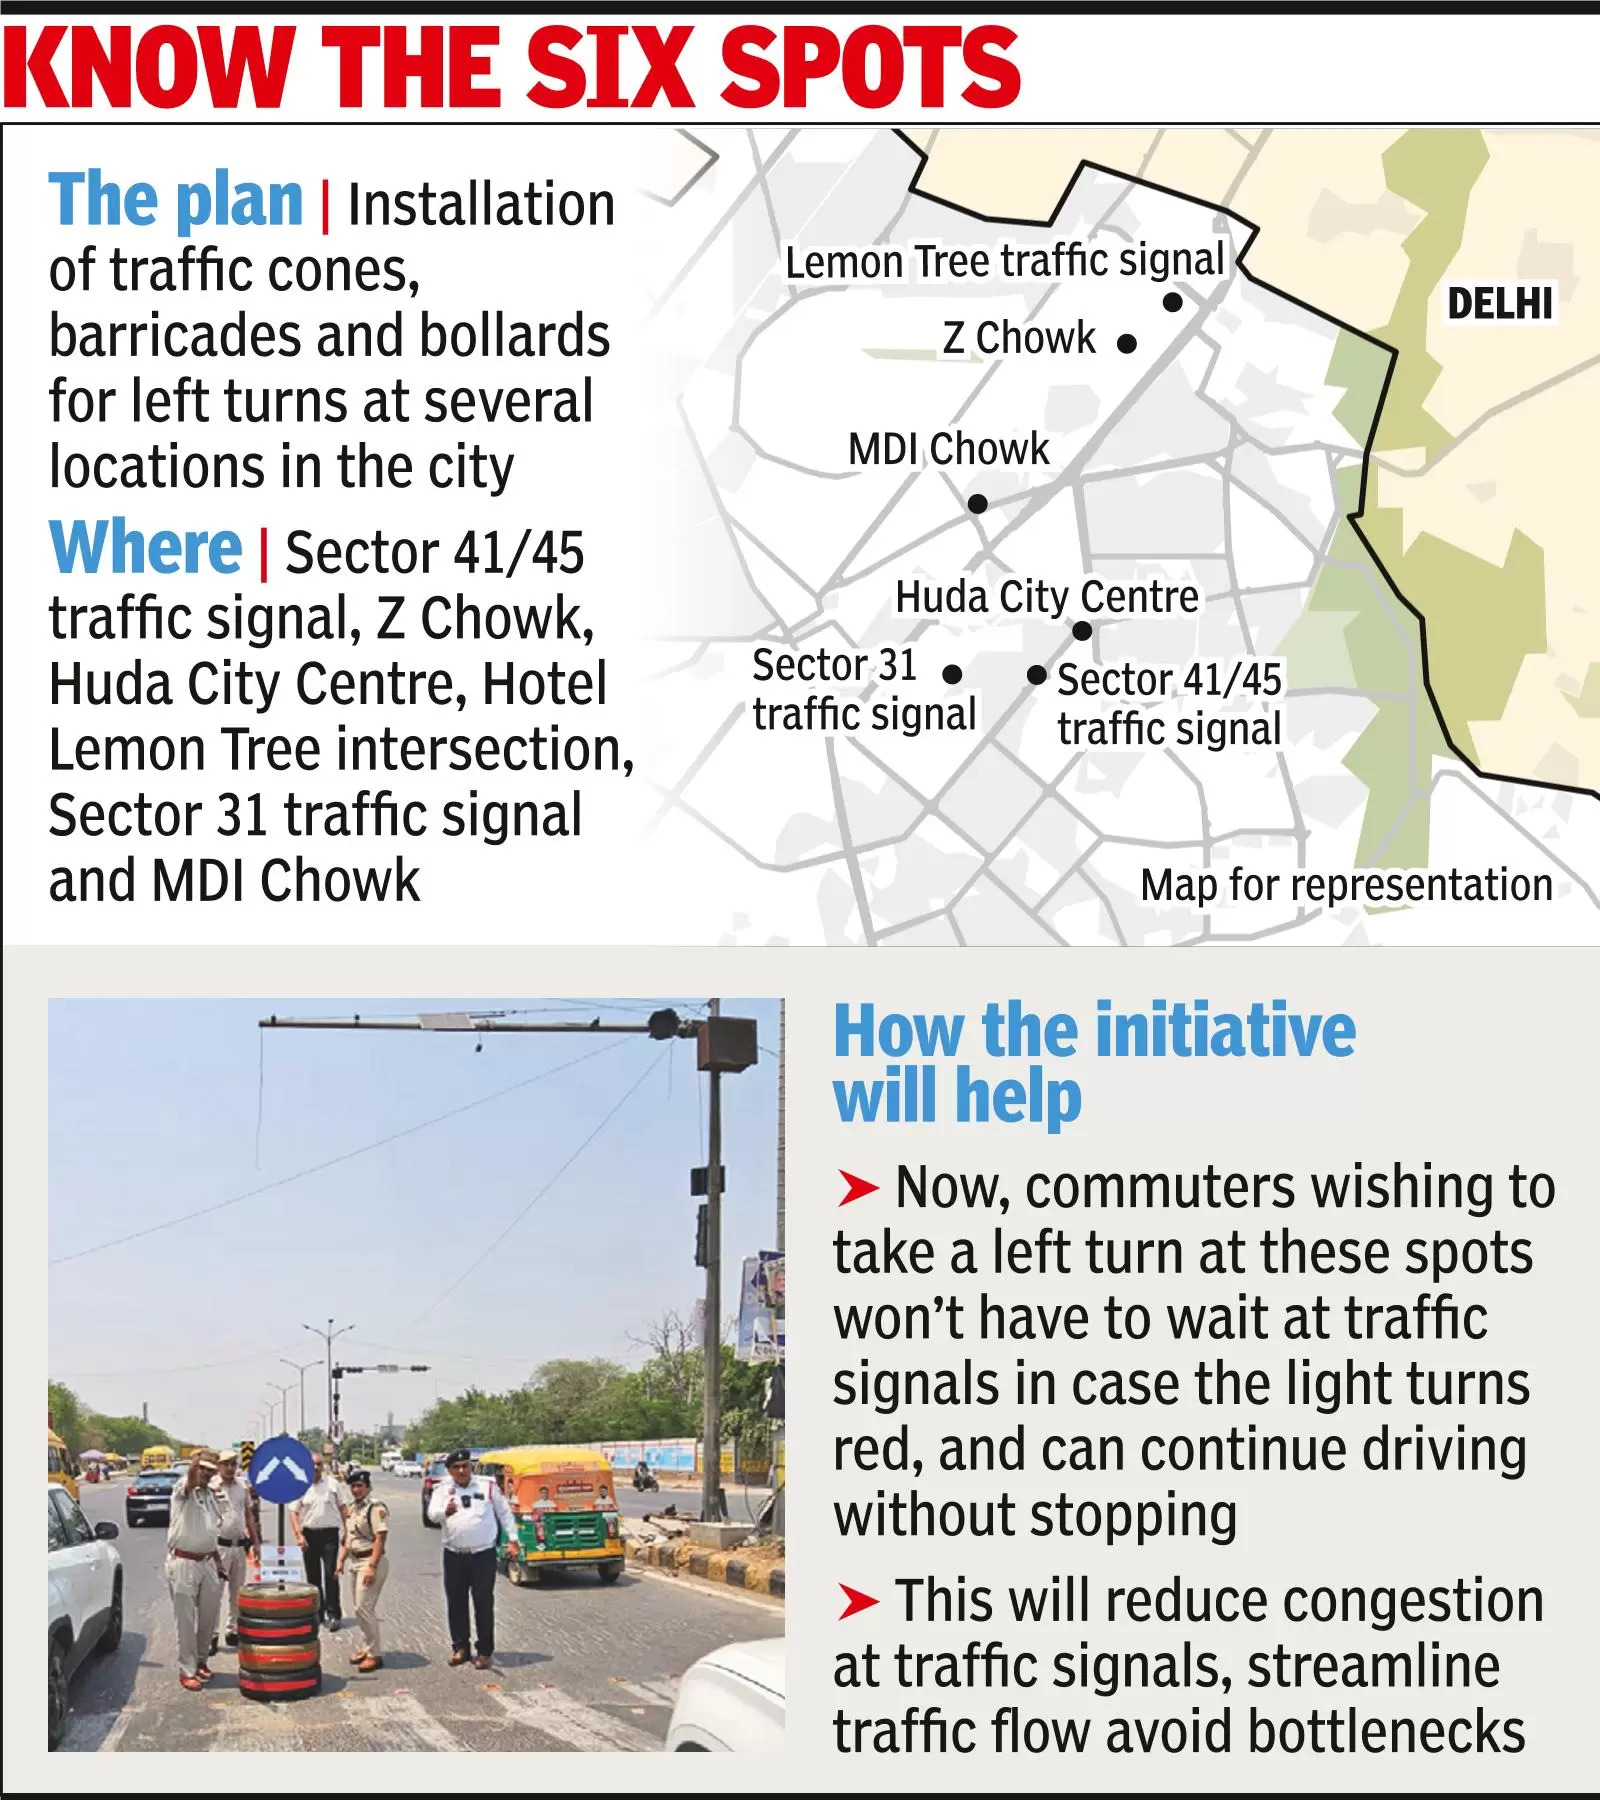 Now, free left turns for commuters at six key junctions to avert snarls